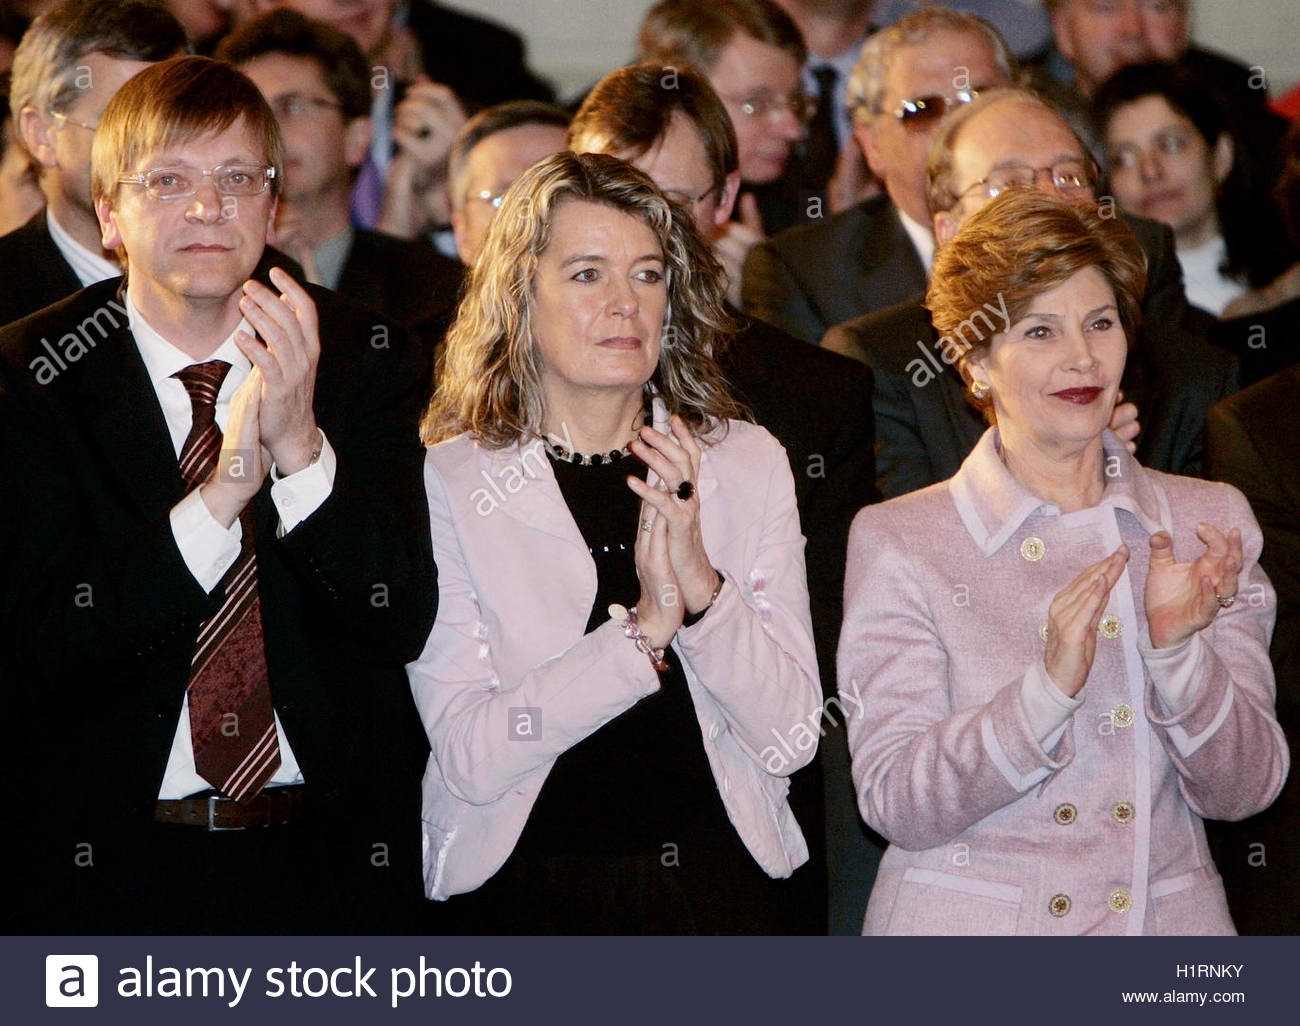 belgium-prime-minister-guy-verhofstadt-l-his-wife-dominique-c-and-H1RNKY.jpg